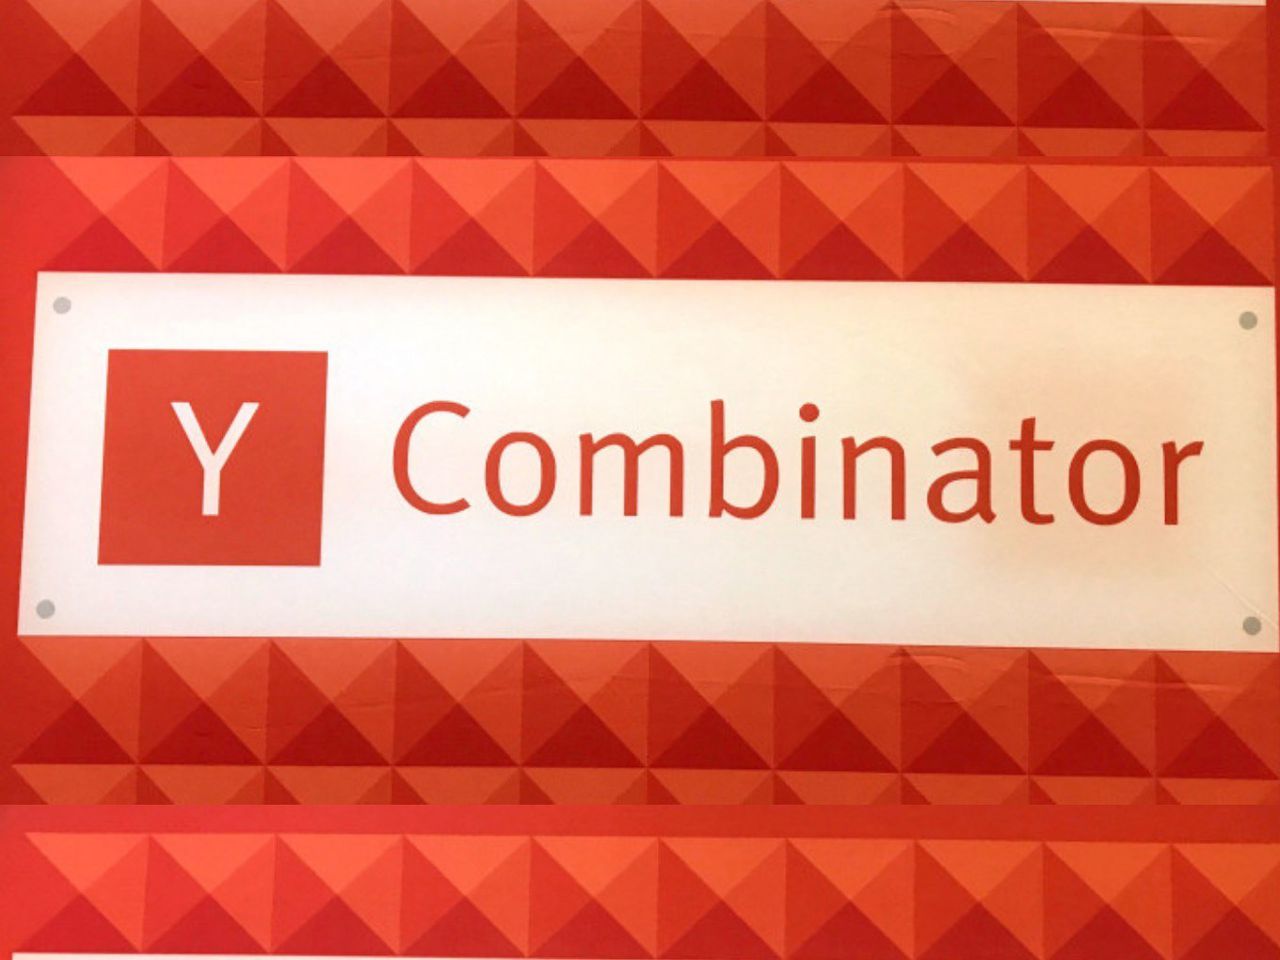 Silicon Valley accelerator Y Combinator's next cohort will take place remotely over video. Image via Inventiva.